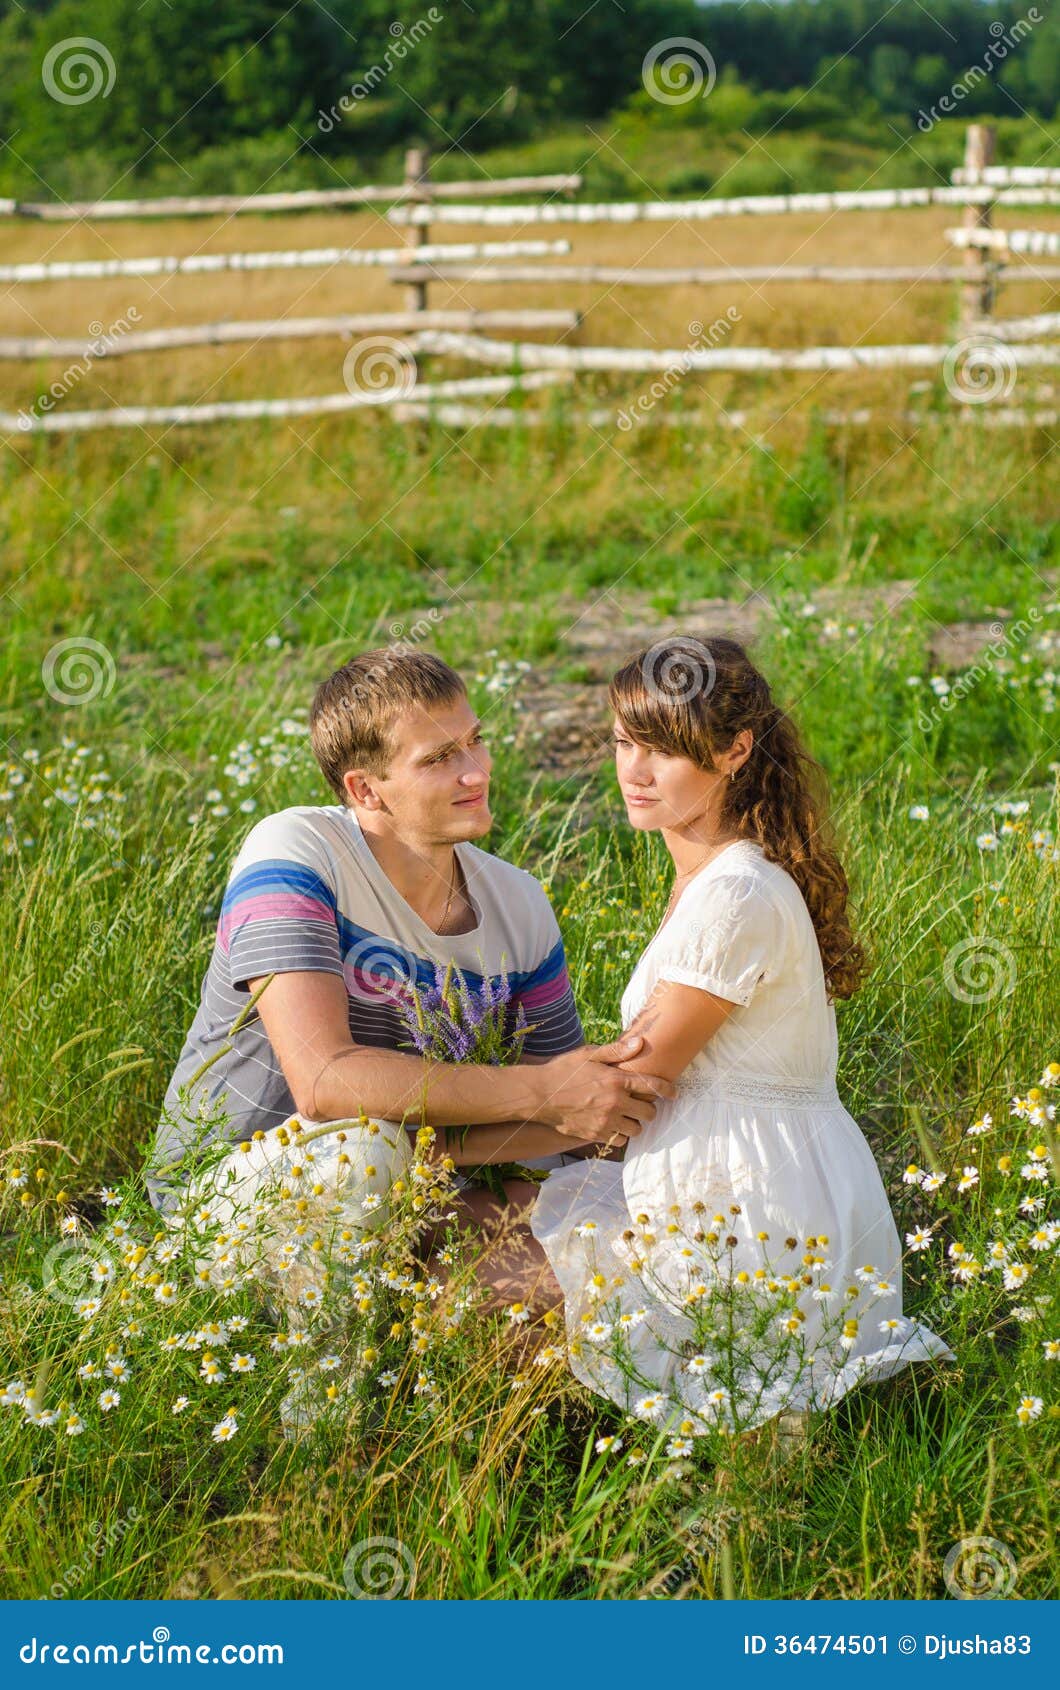 Young Loving Couple Embracing Each Other Sitting in the Grass Stock